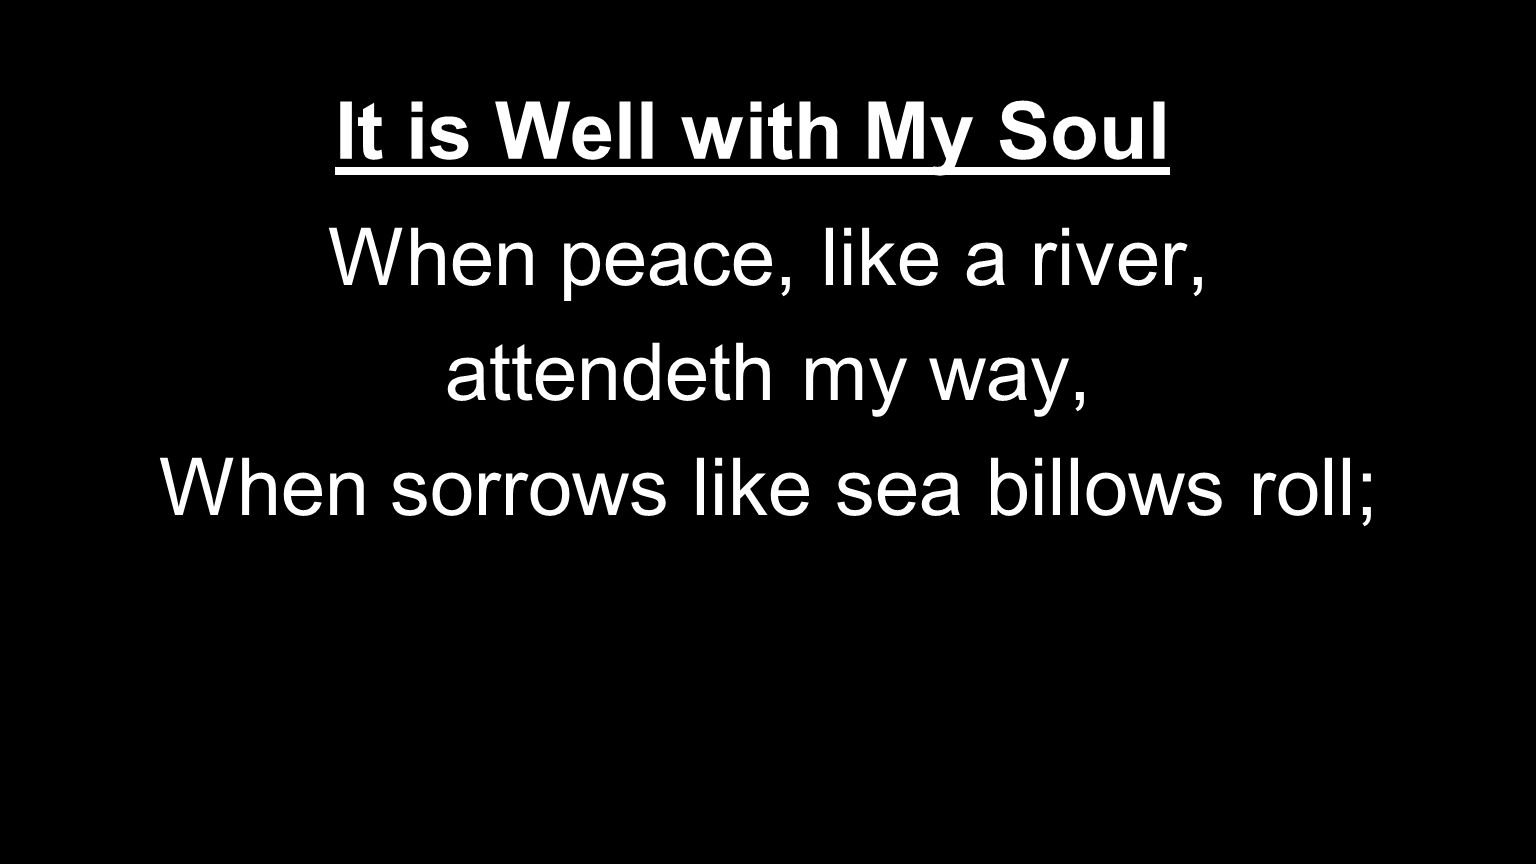 It is Well with My Soul When peace, like a river, attendeth my way, When sorrows like sea billows roll;